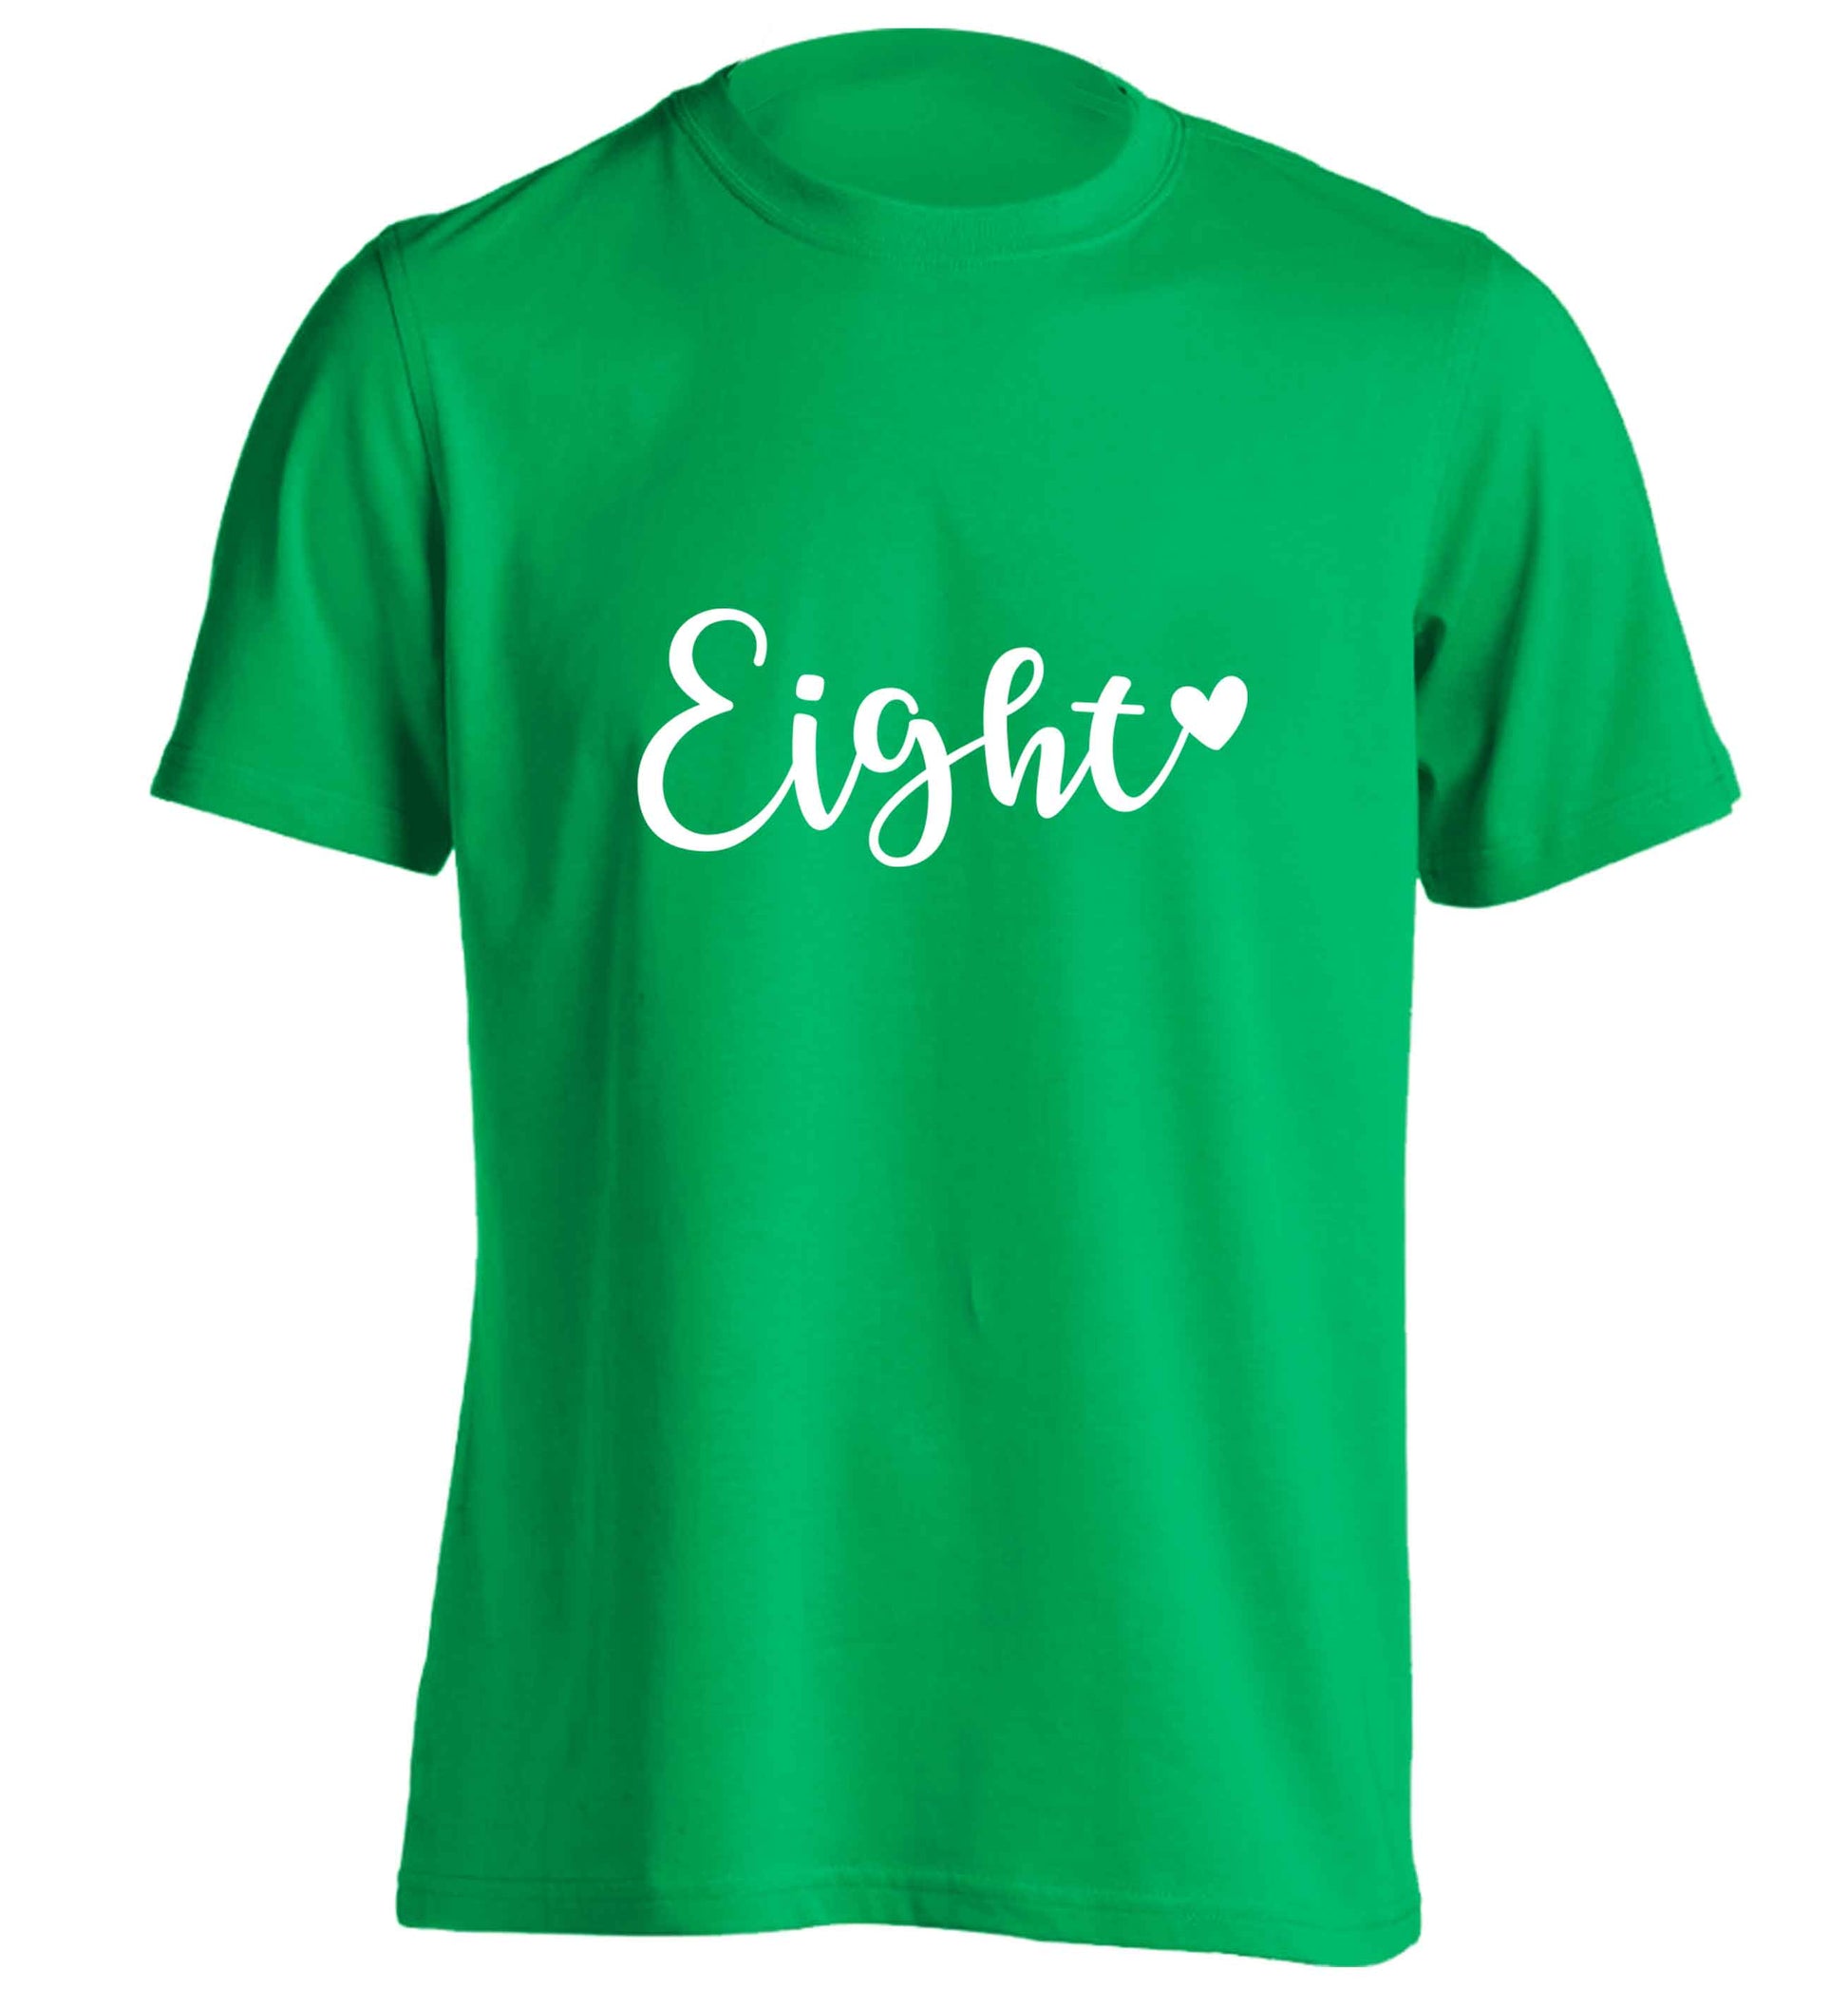 Eight and heart adults unisex green Tshirt 2XL